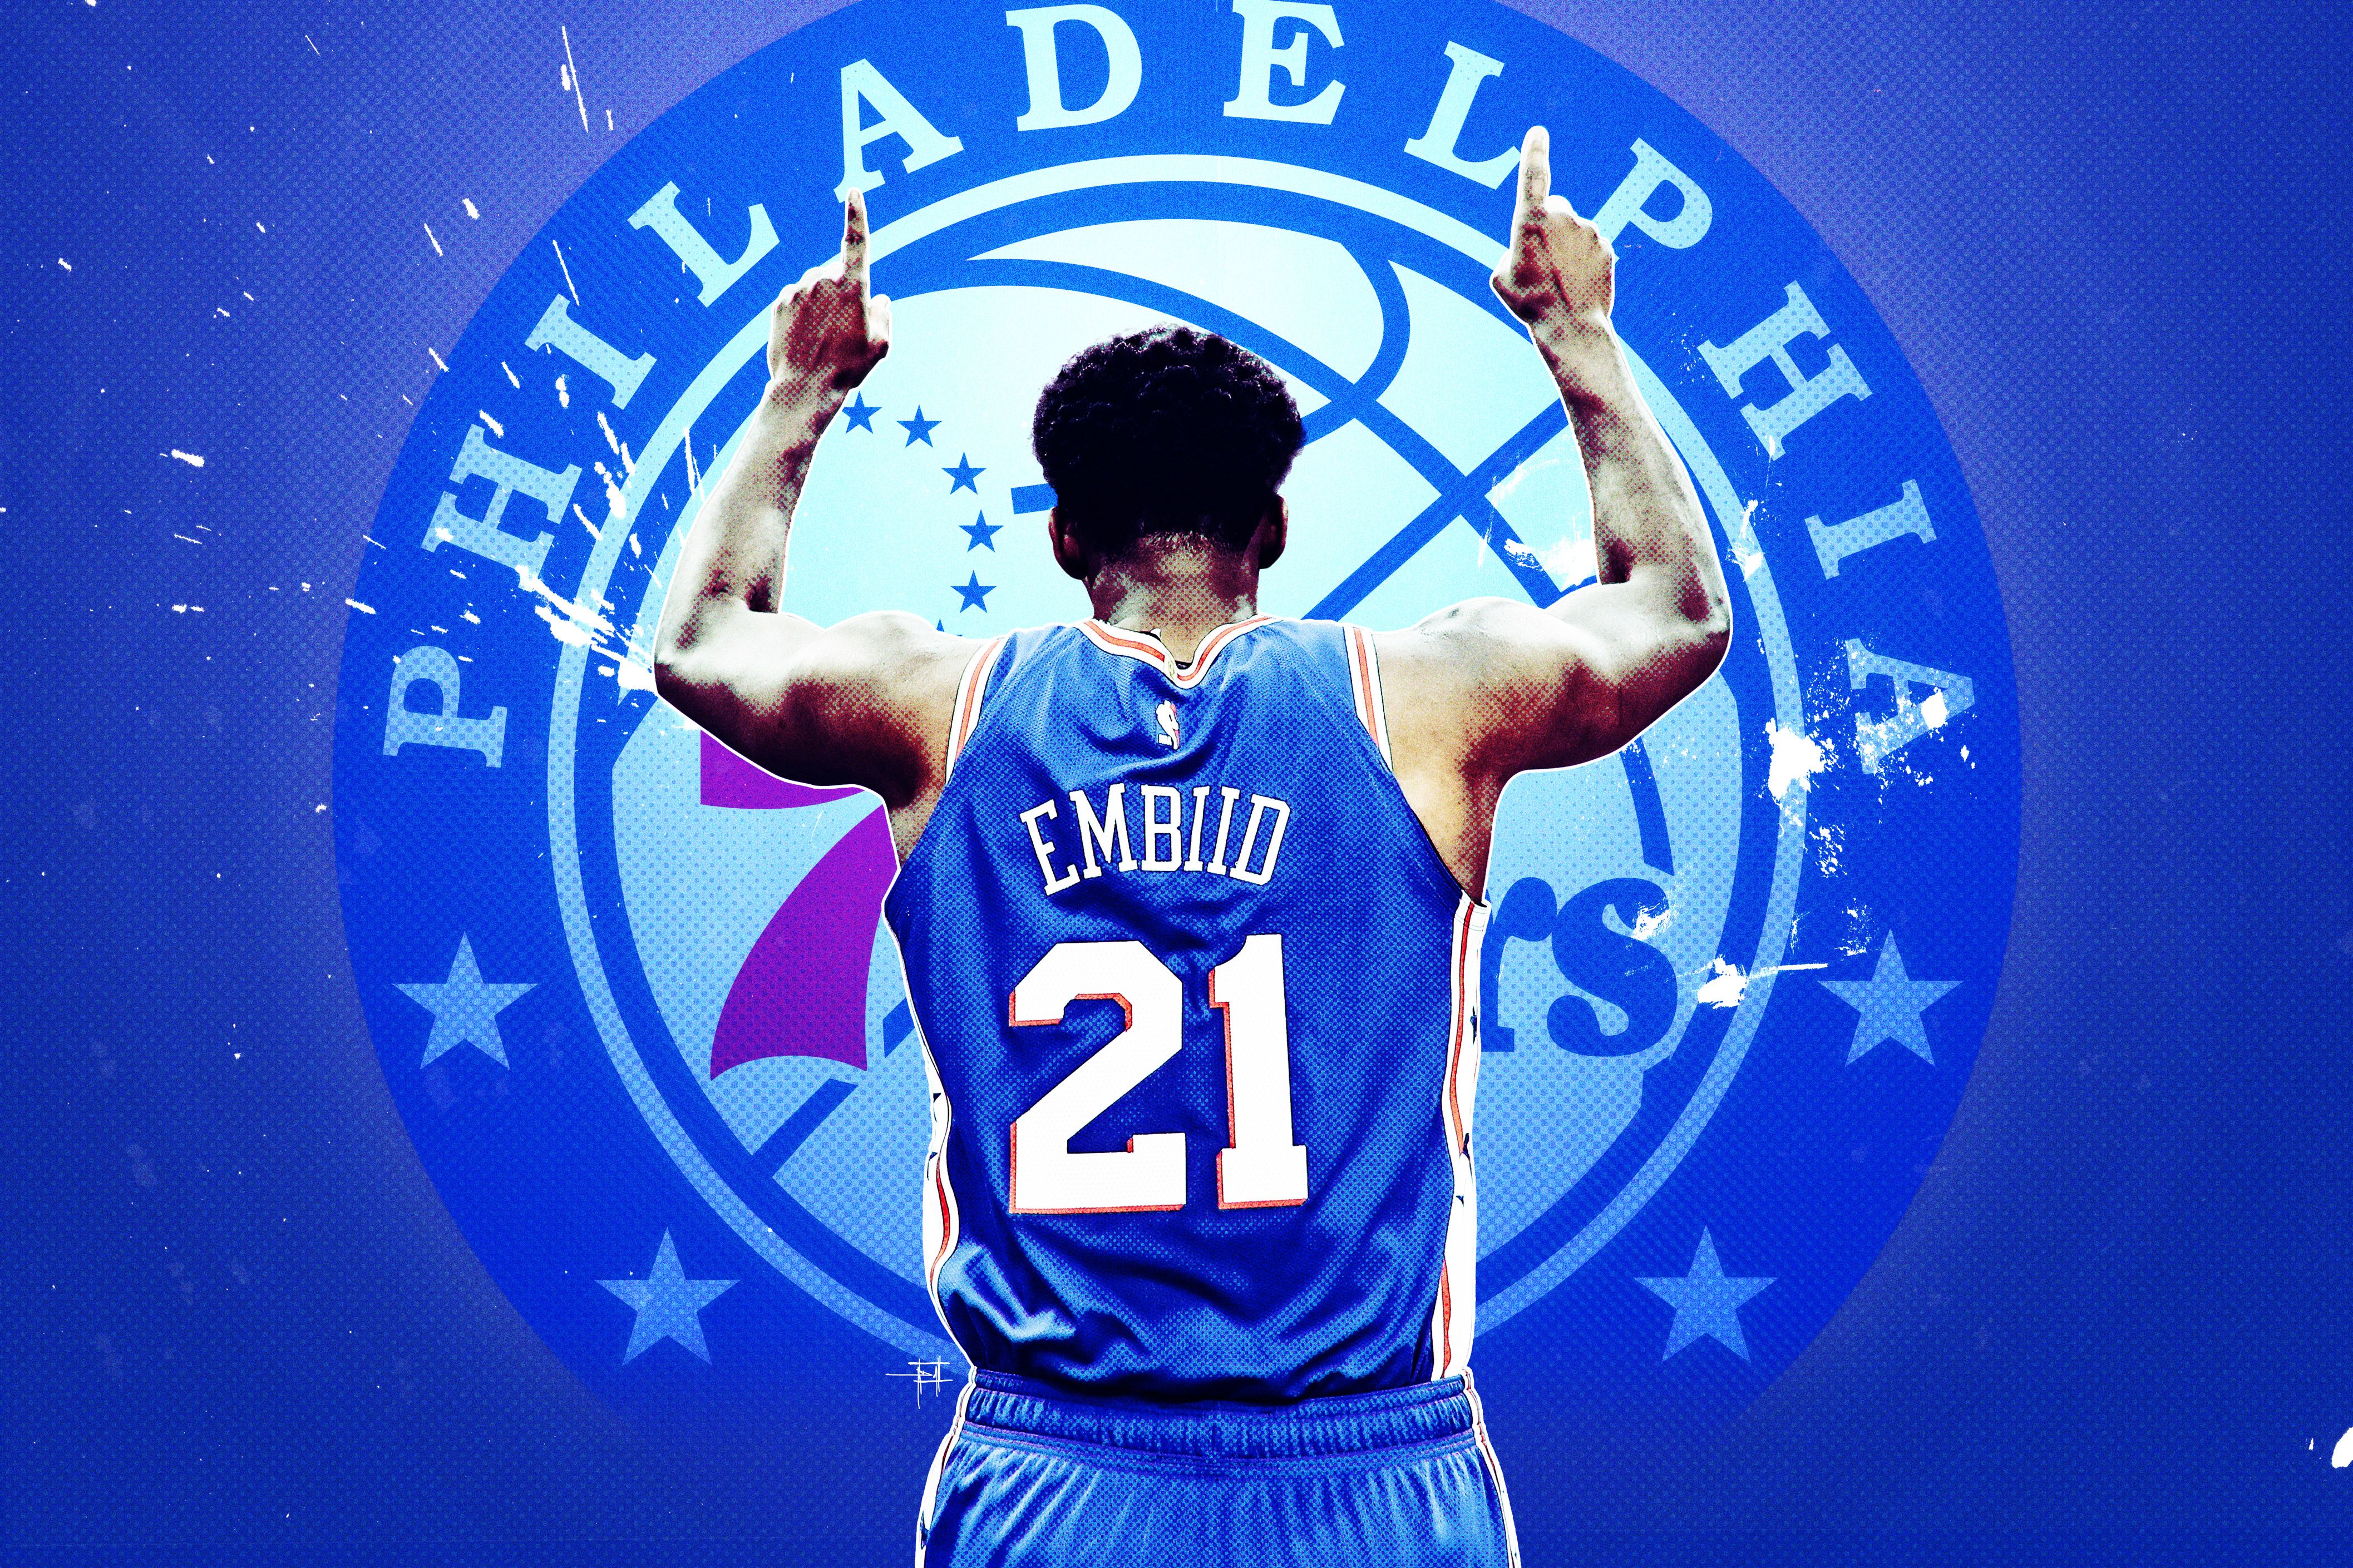 Embiid Wallpaper I Made For Myself To Share W You Guys. 4229 X 2819